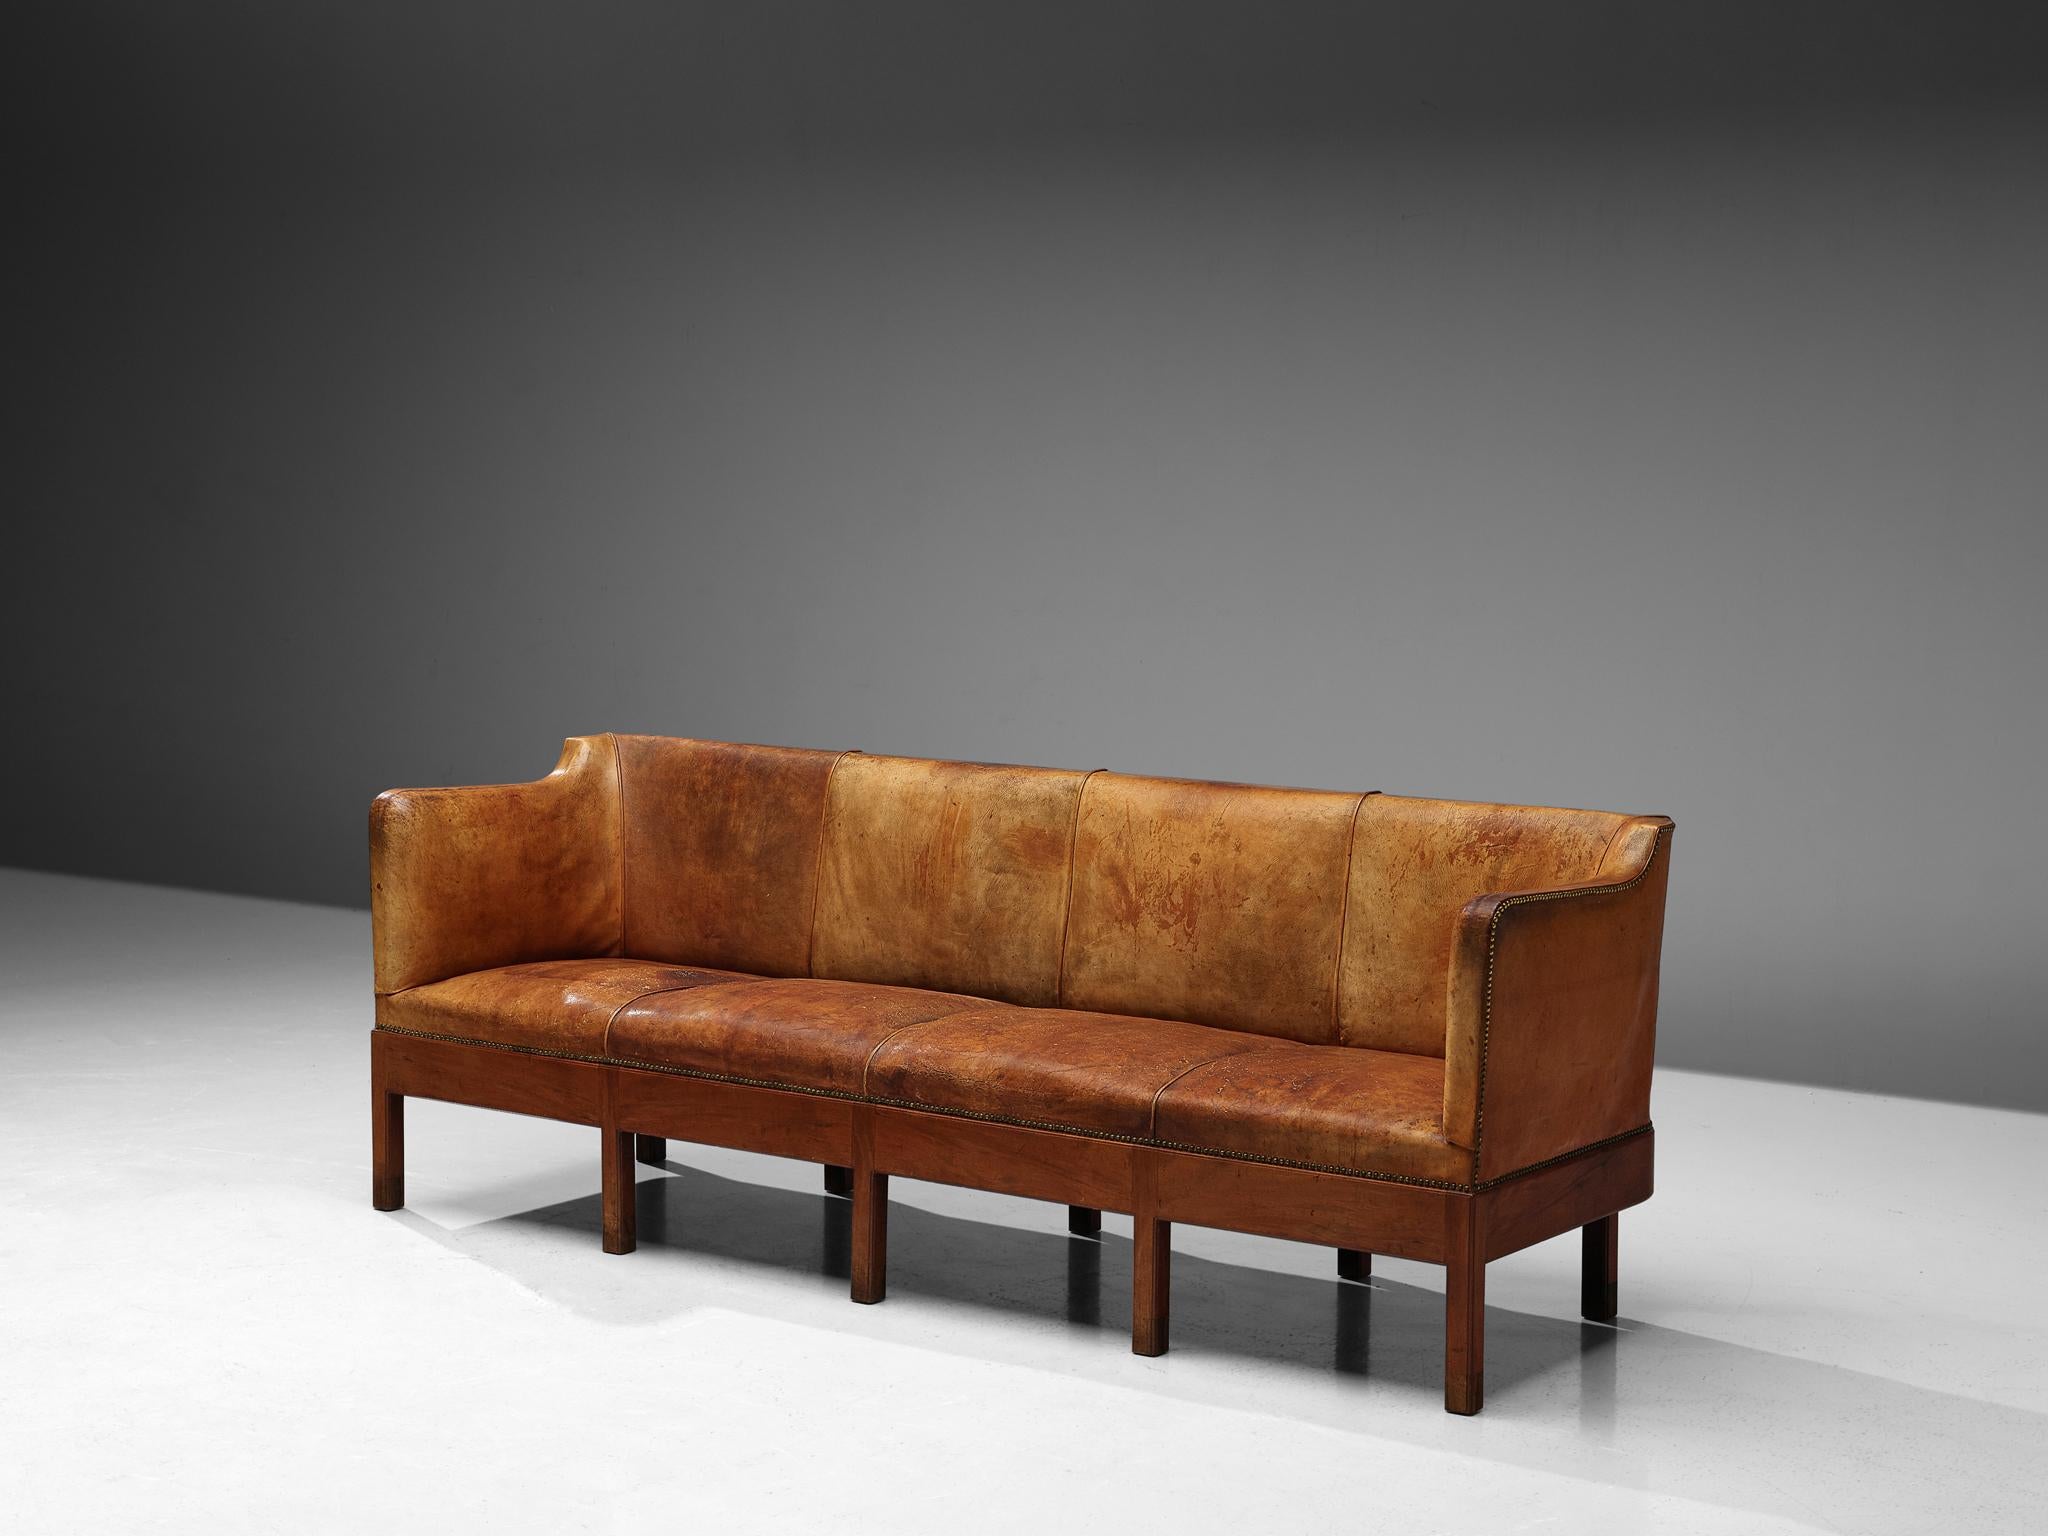 Jacob Kjaer, sofa, original Niger leather, brass, stained mahogany, Denmark, 1930s 

Exemplifying the quintessential essence of Danish design of the thirties, this rare sofa by Jacob Kjaer captures a harmonious blend of understated simplicity and